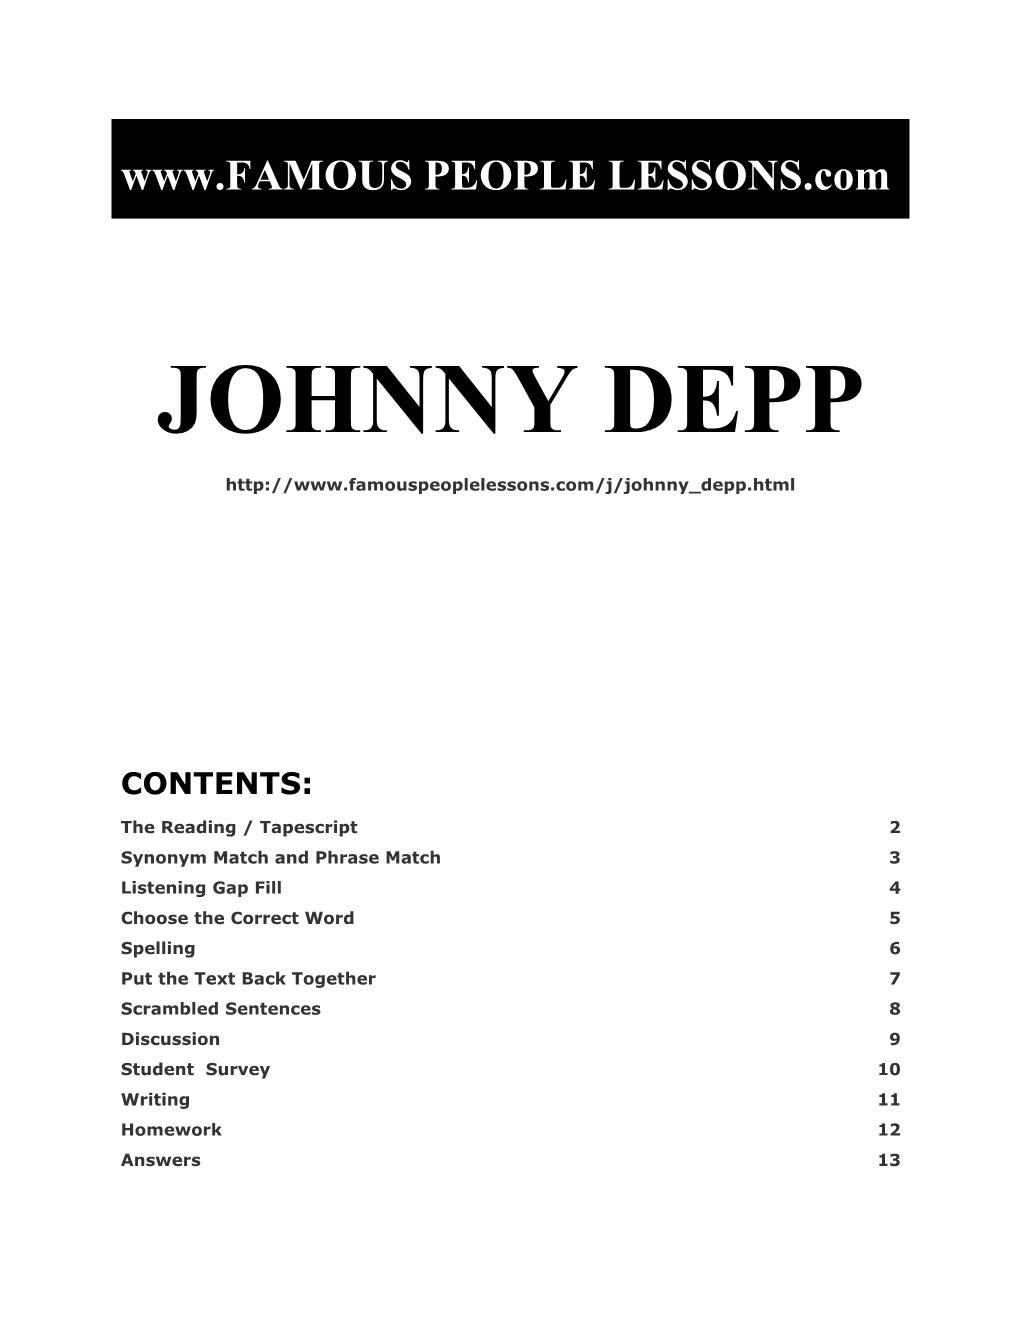 Famous People Lessons - Johnny Depp